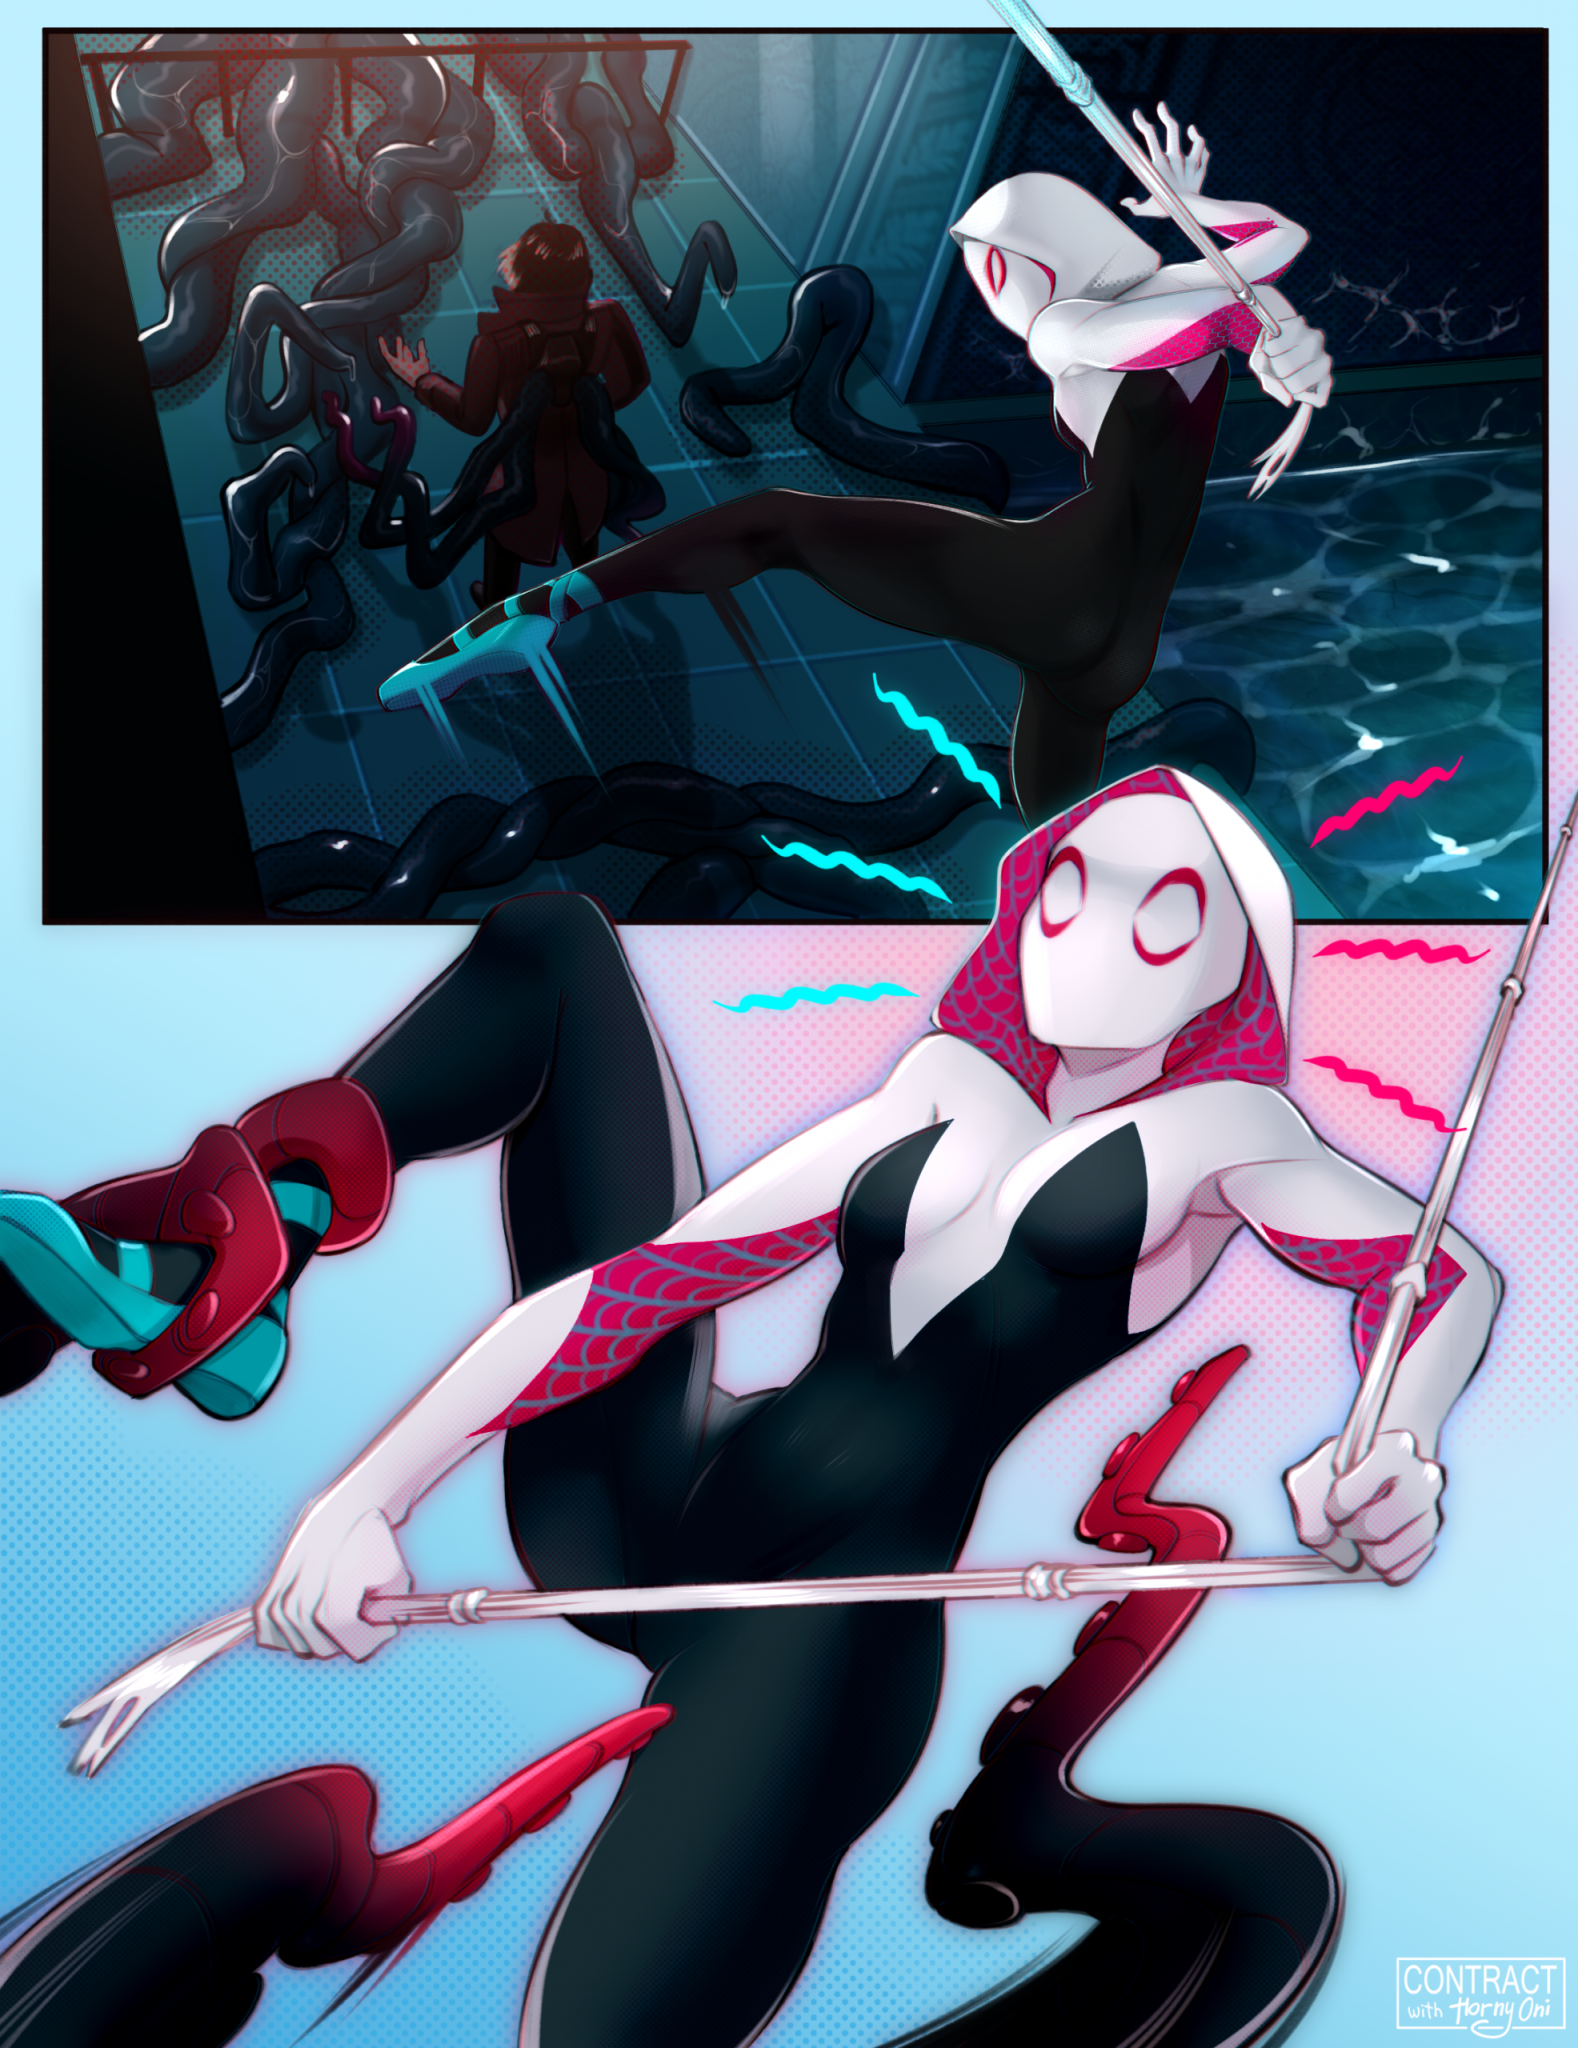 Contract with Spider-Gwen